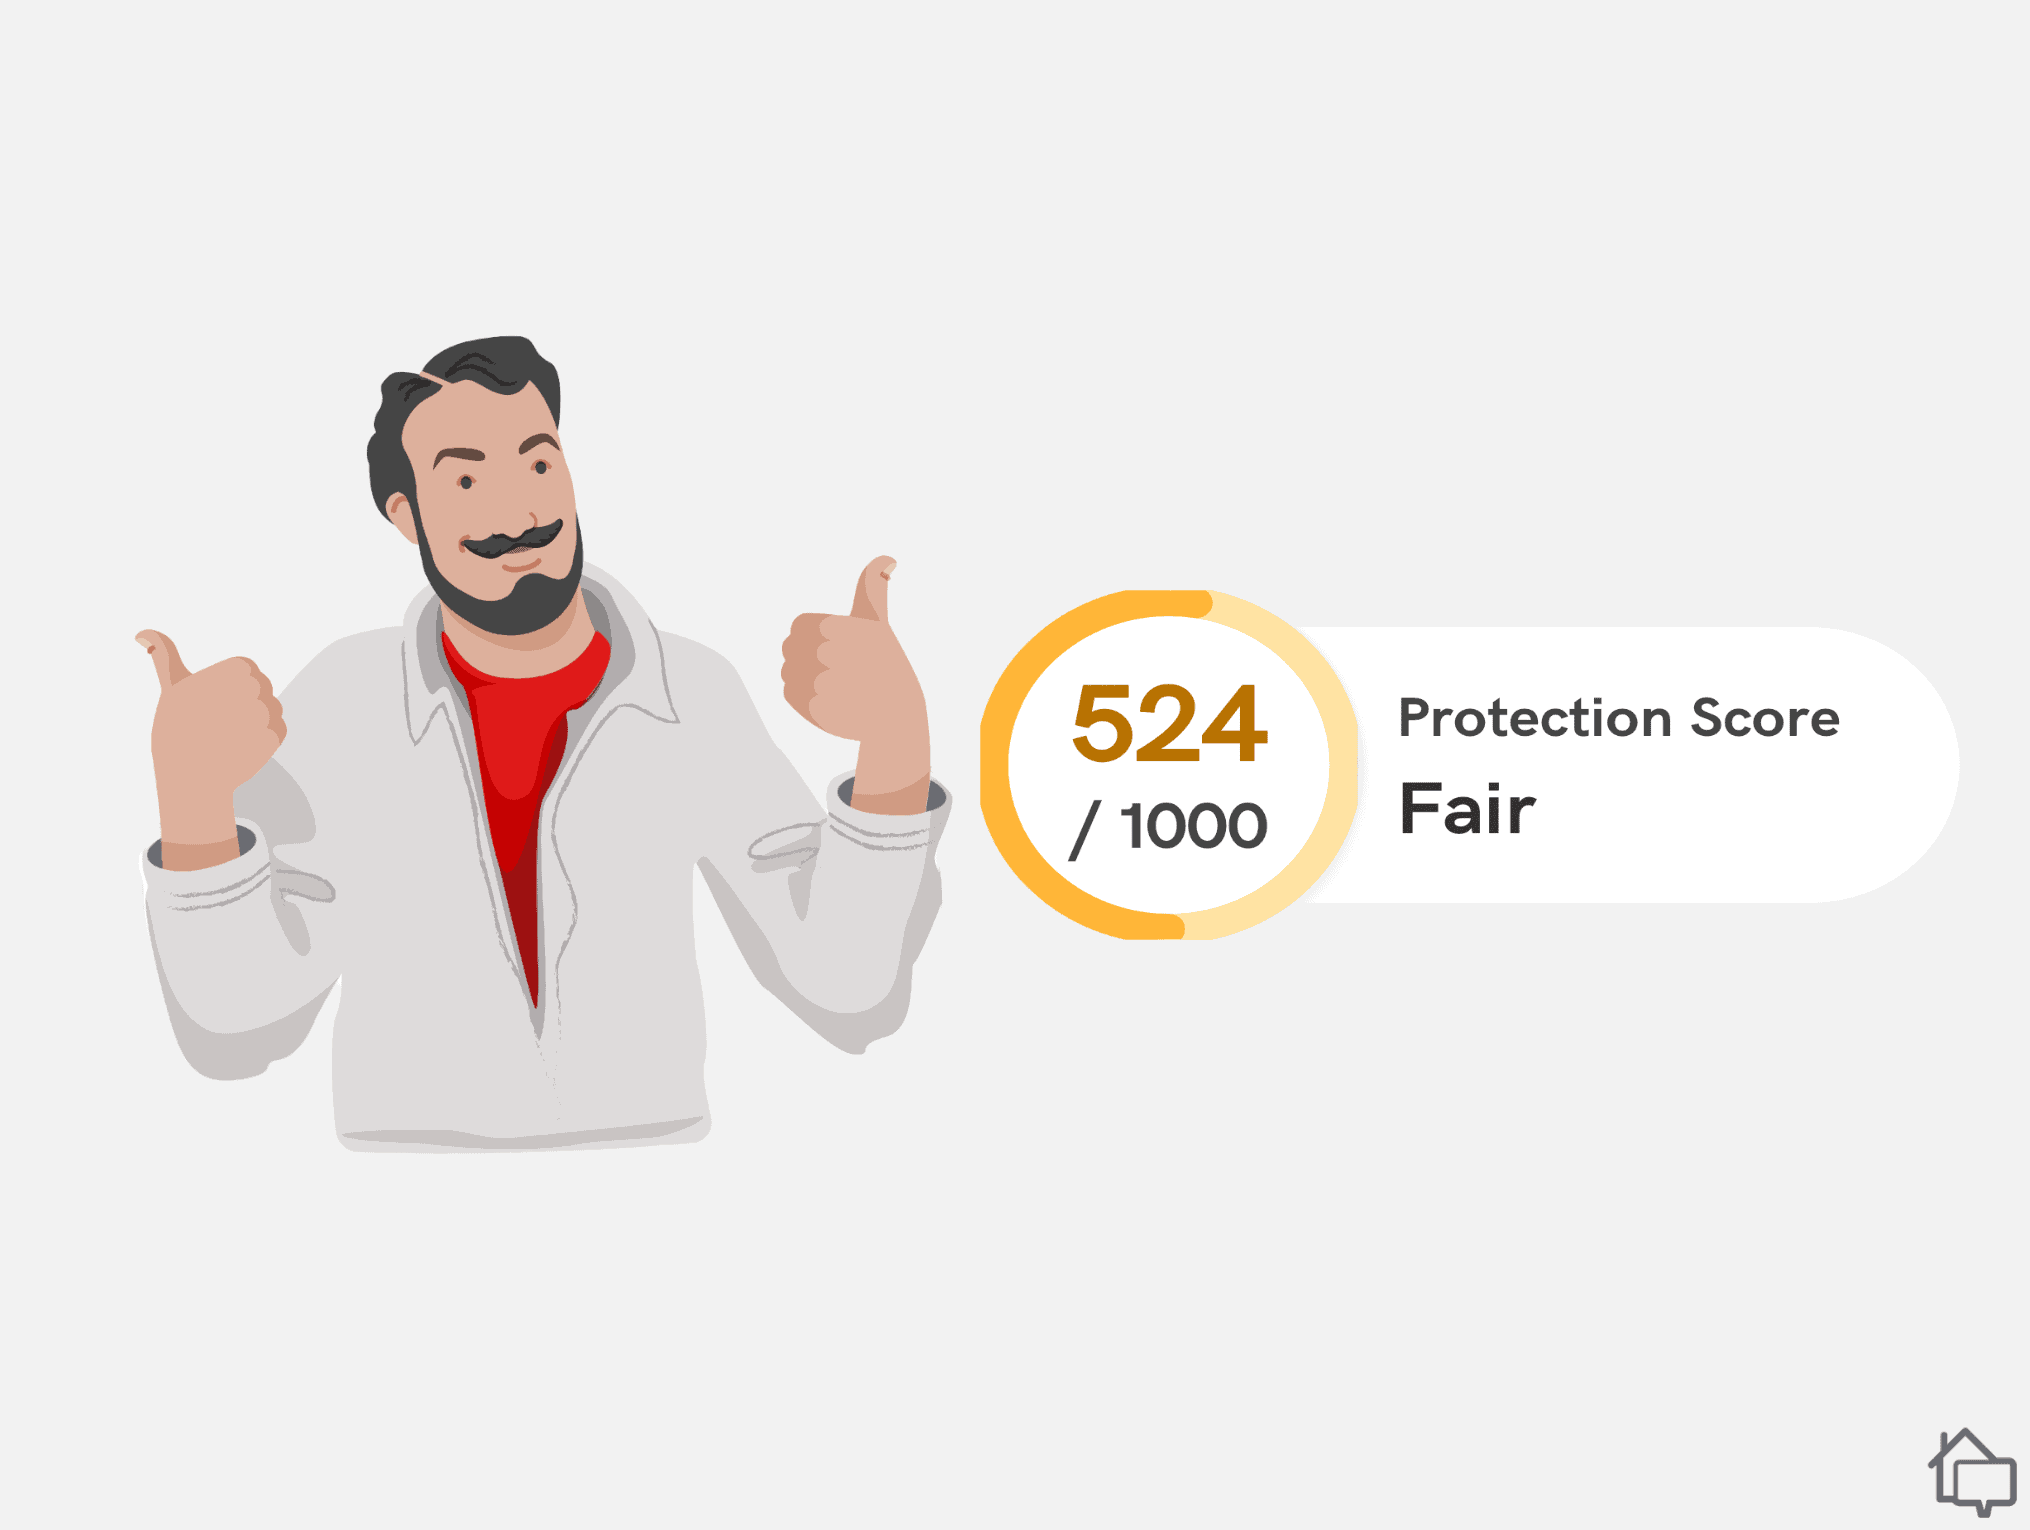 McAfee gave me a Protection Score (complete with bearded Fonz). I did manage to nudge it up, but only after I installed my antivirus software.